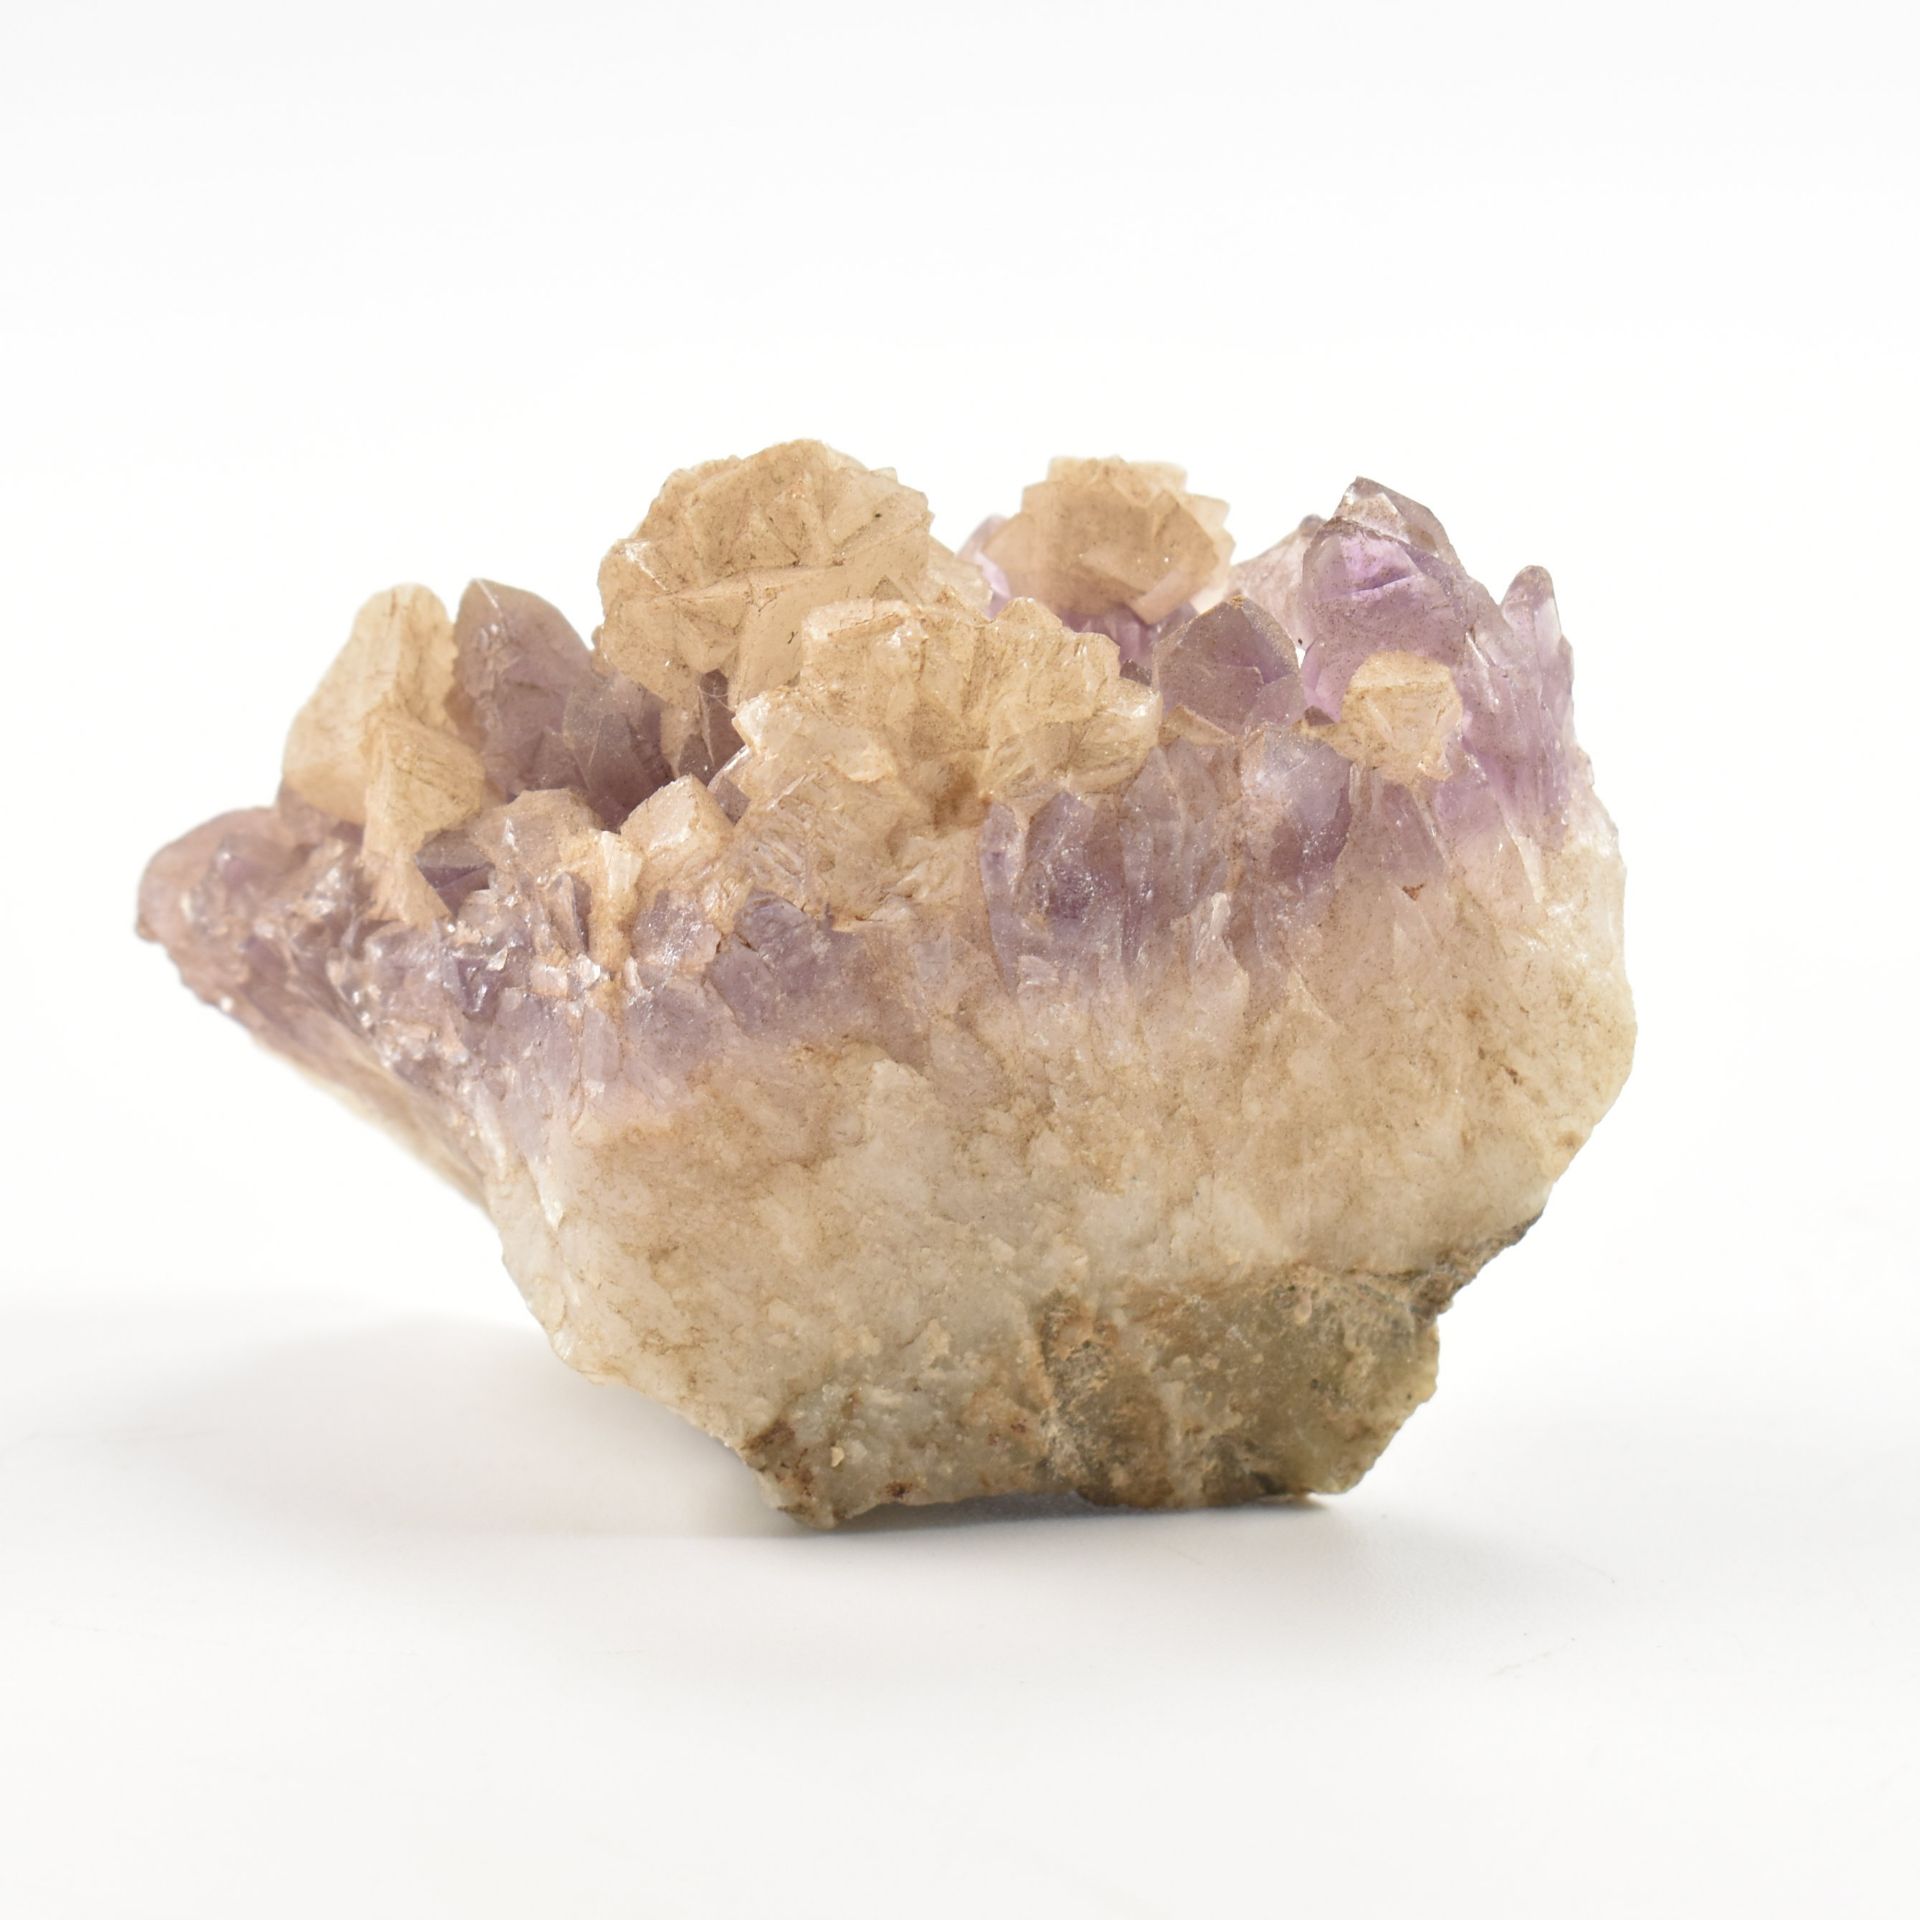 NATURAL HISTORY - GEODE & MINERALS - Image 7 of 12